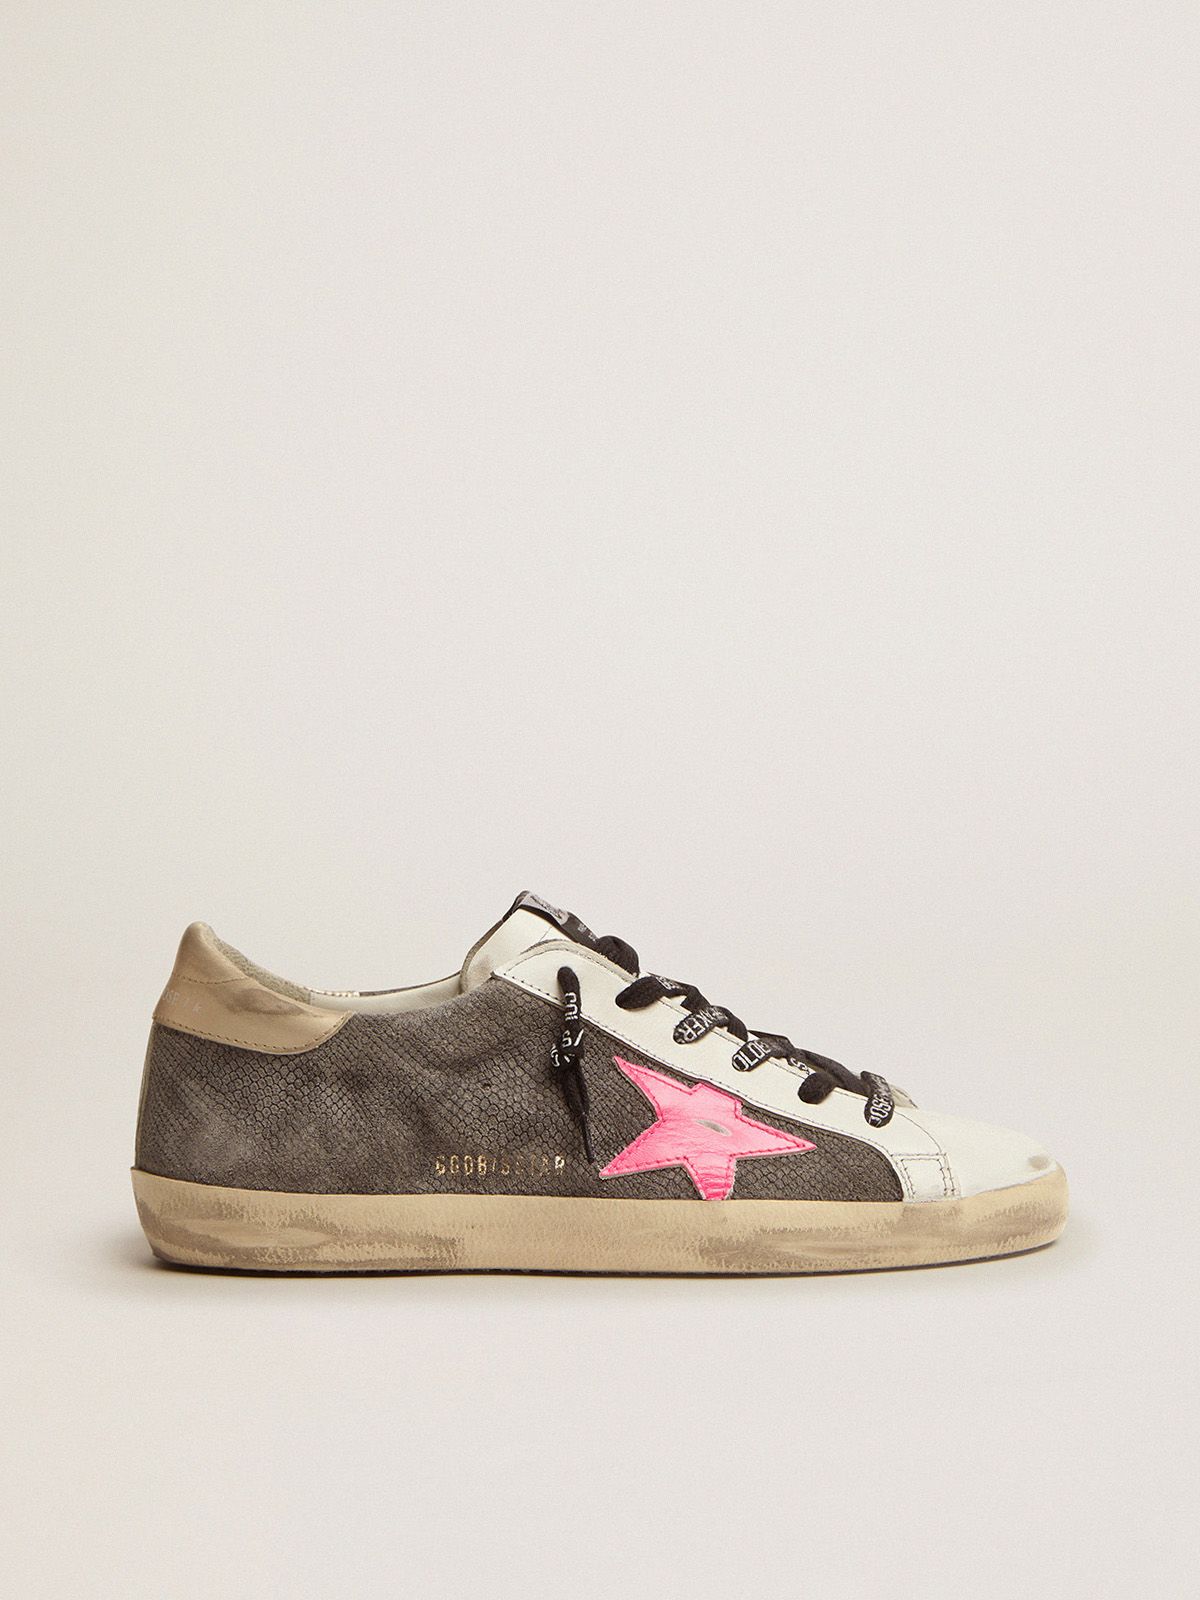 Super-Star LTD sneakers with snake-print suede upper and gold laminated leather heel tab